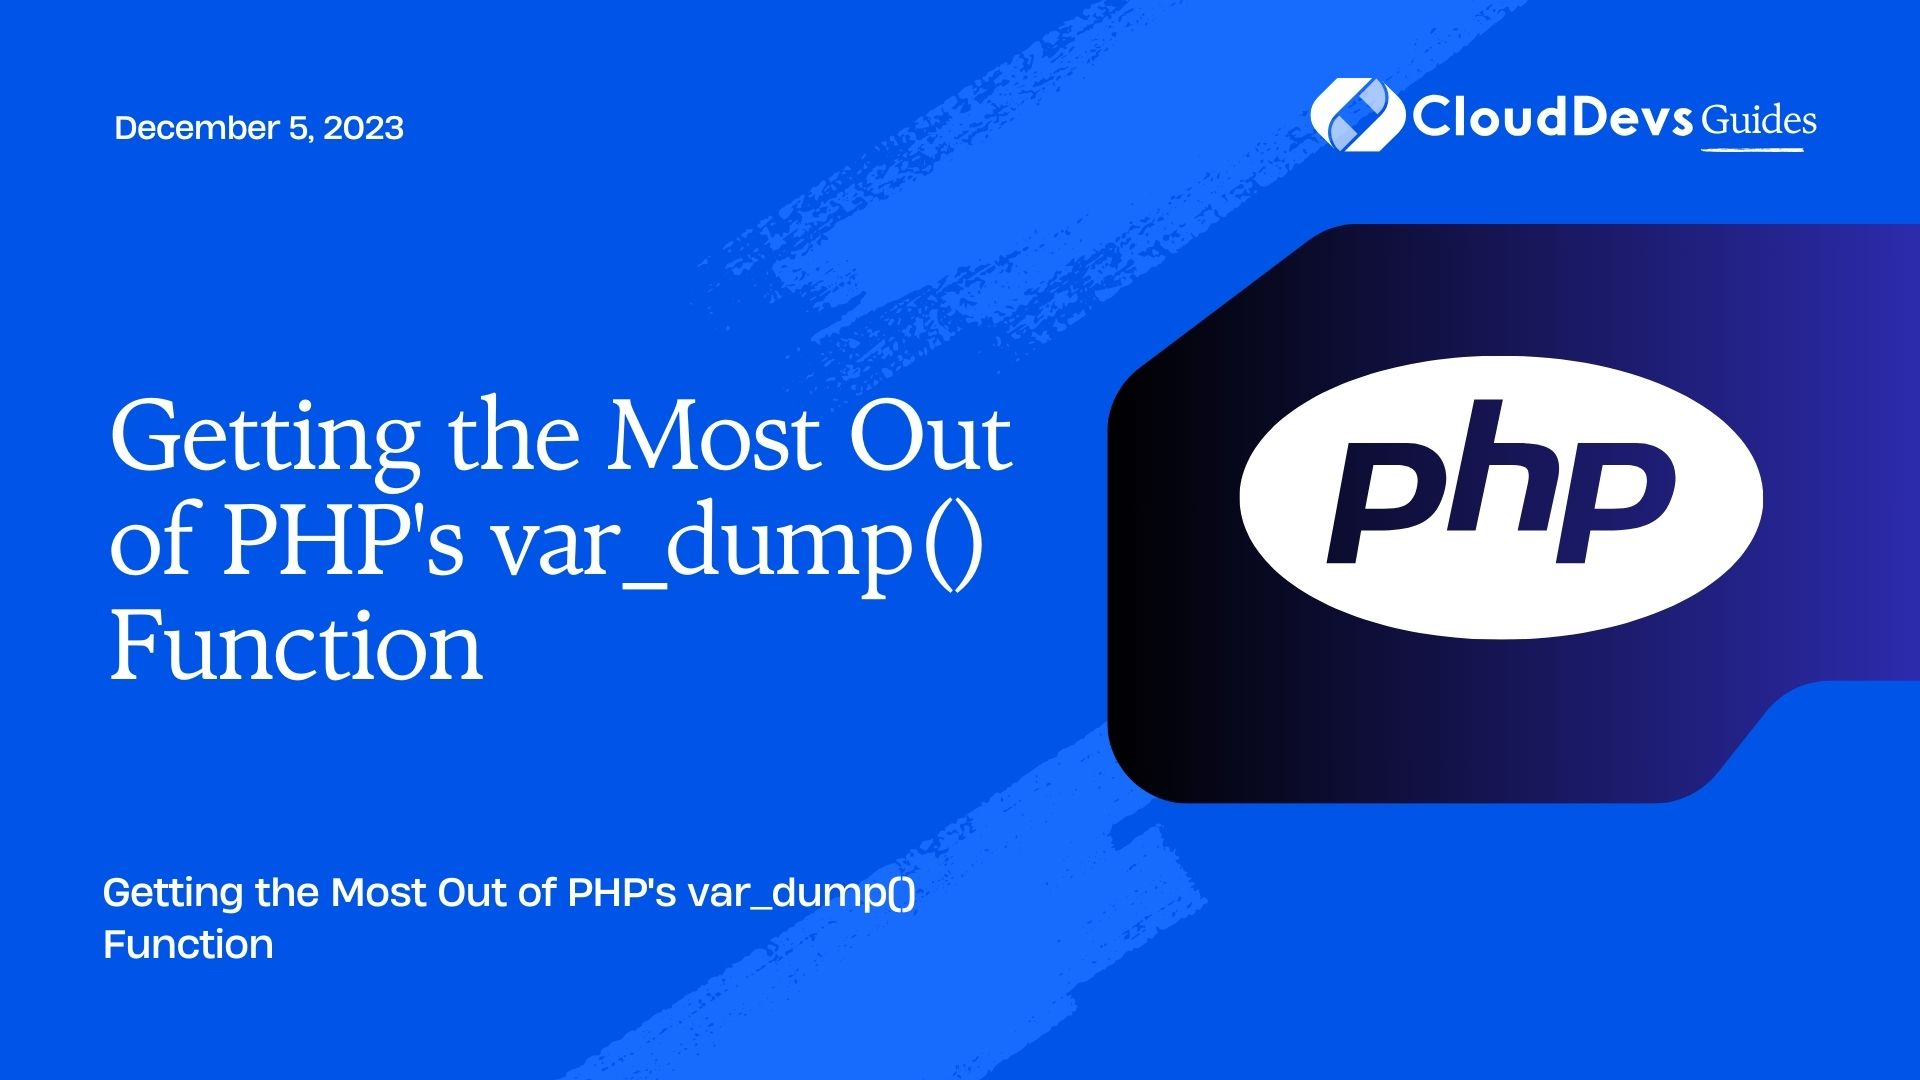 Getting the Most Out of PHP's var_dump() Function